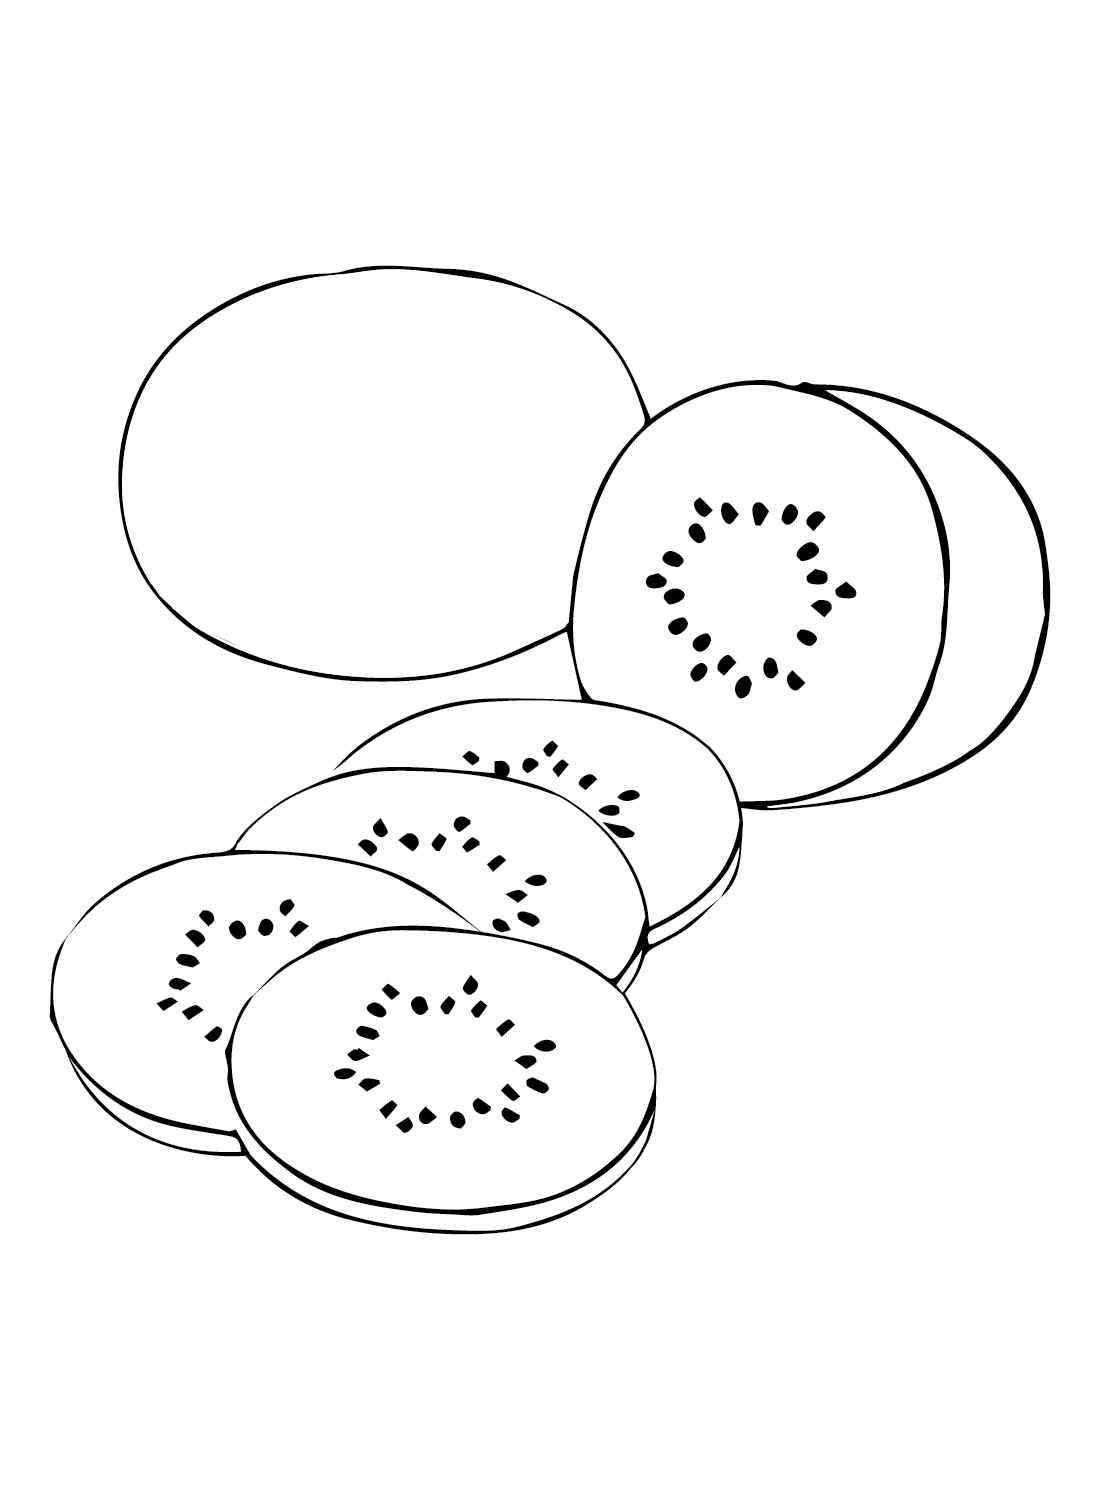 Kiwi Fruit for Kids Coloring Page